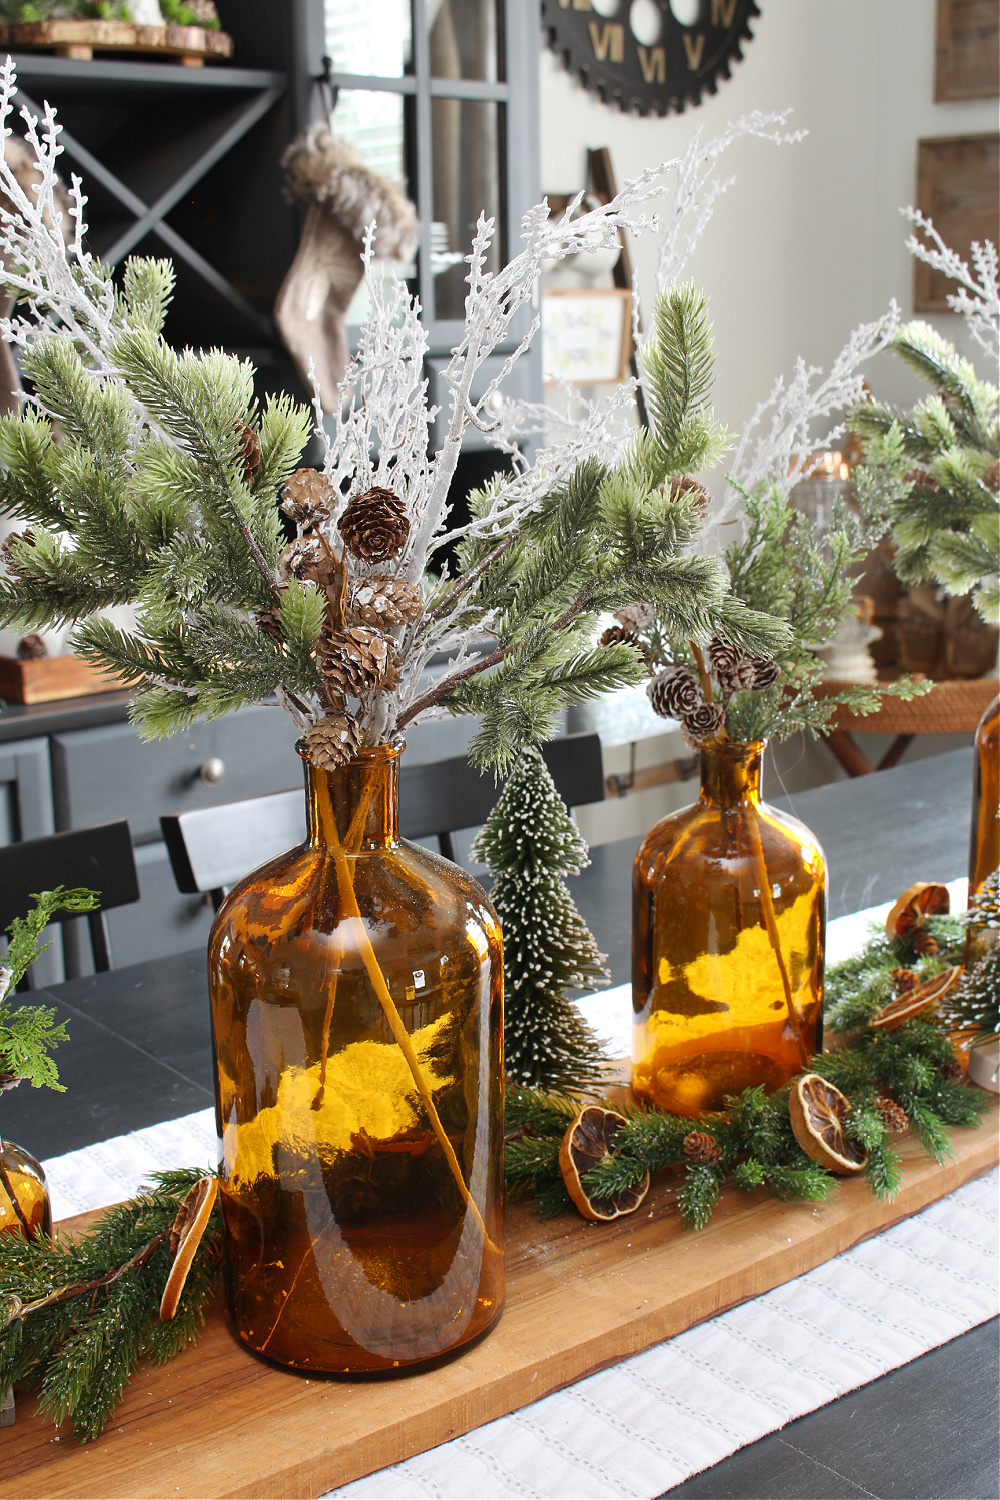 Christmas centerpiece with amber glass and greenery.